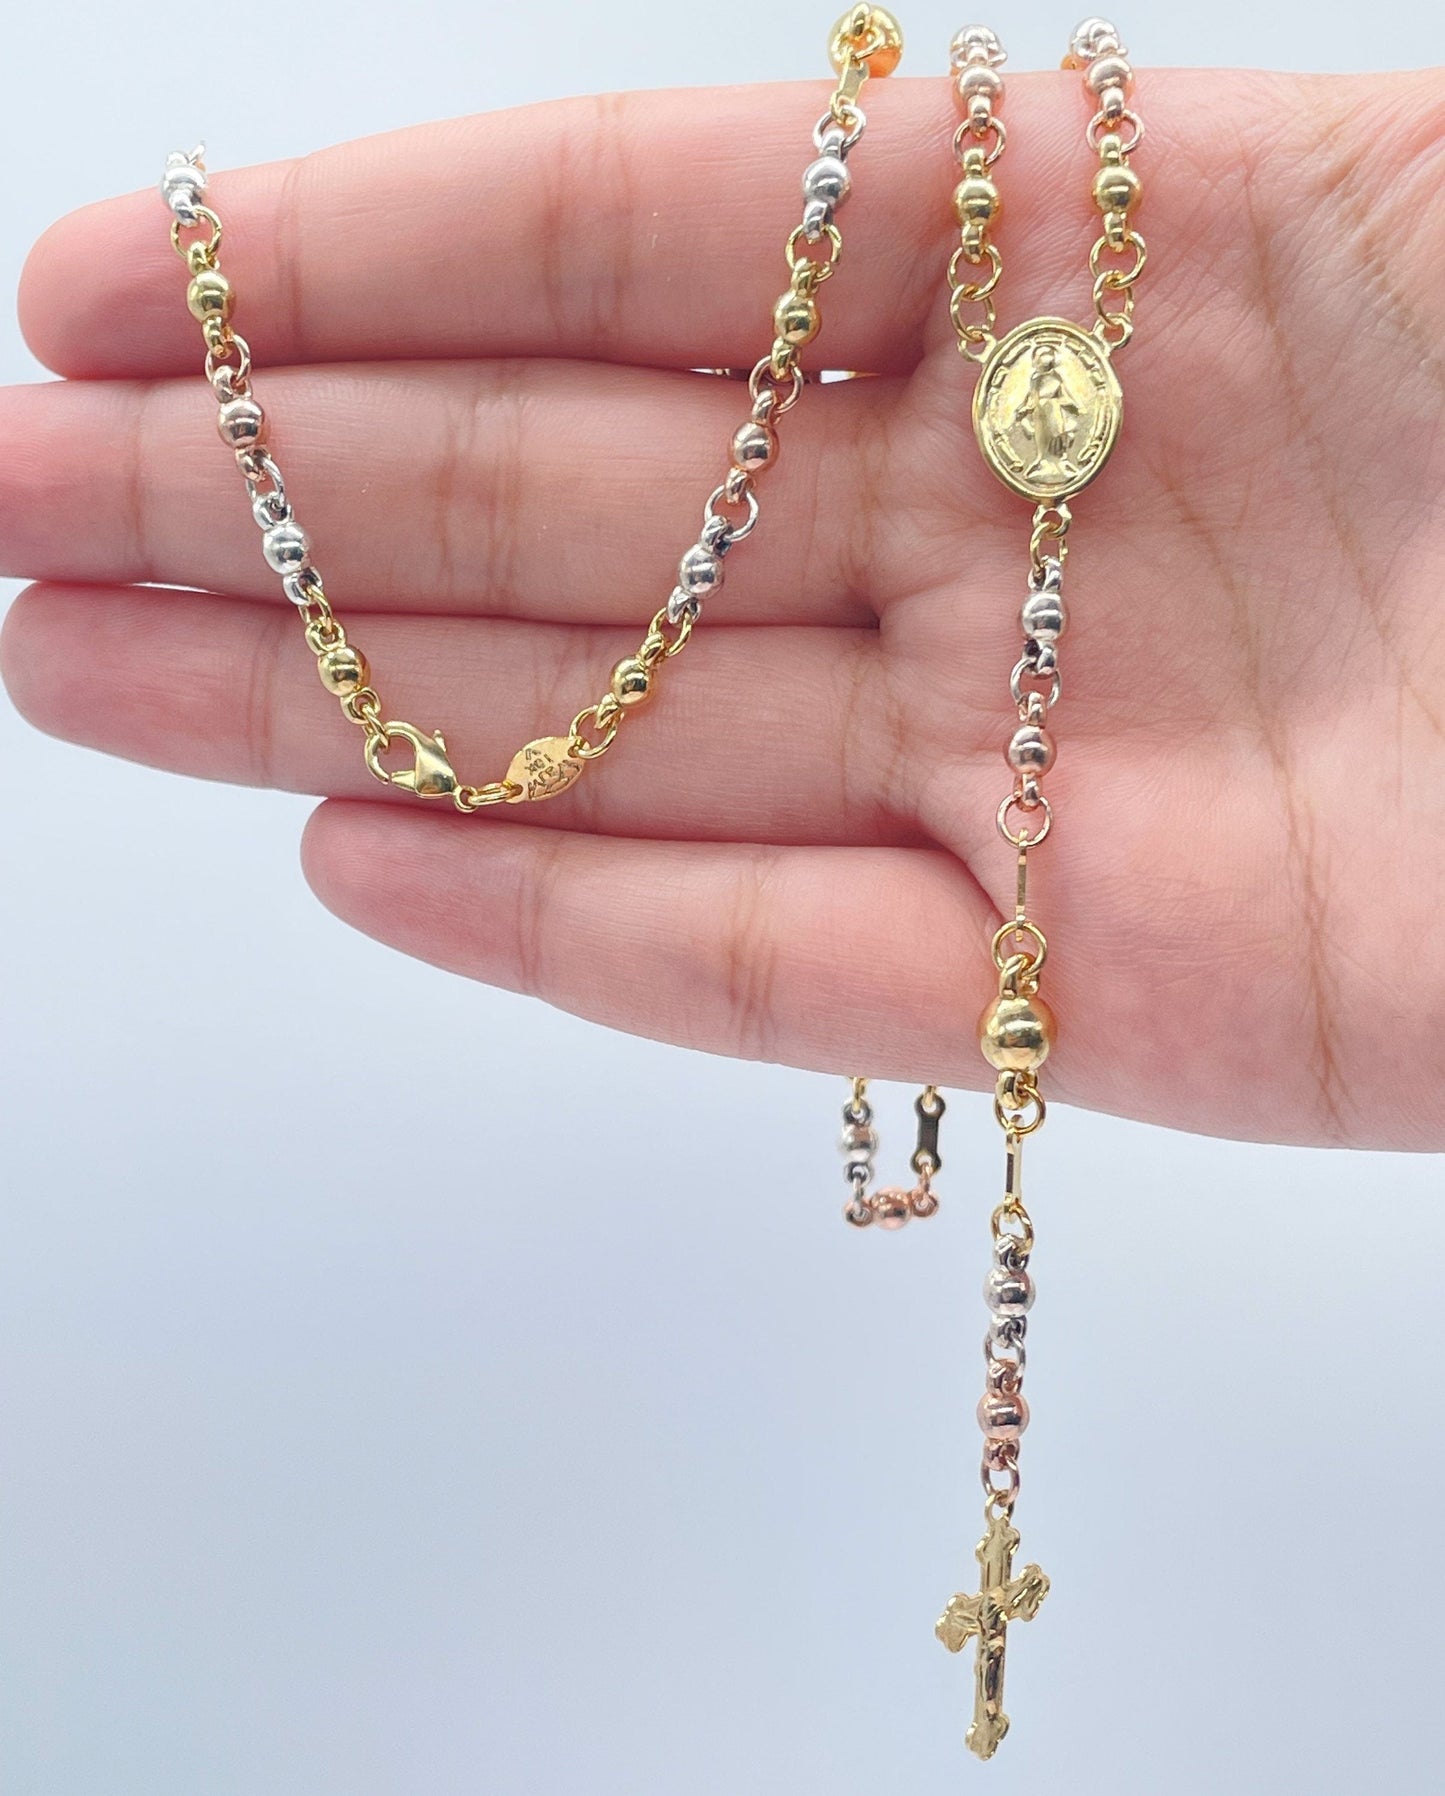 Trendy 18k Gold Layered Tri Color Bead Rosary Necklace Featuring Our Lady of